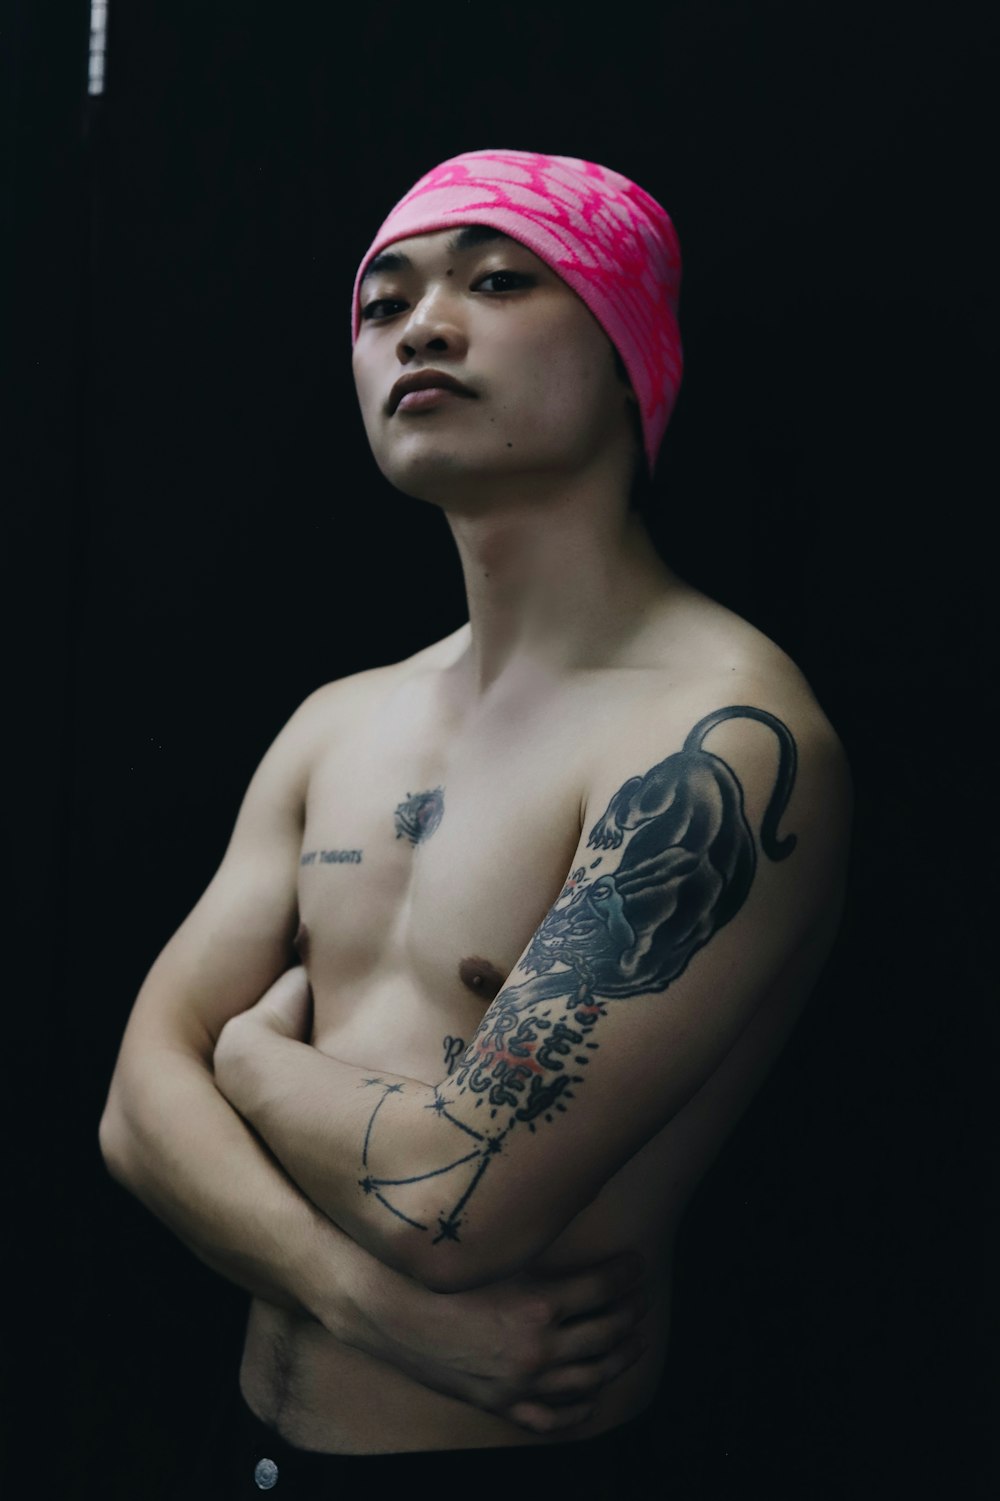 a man with a pink towel on his head